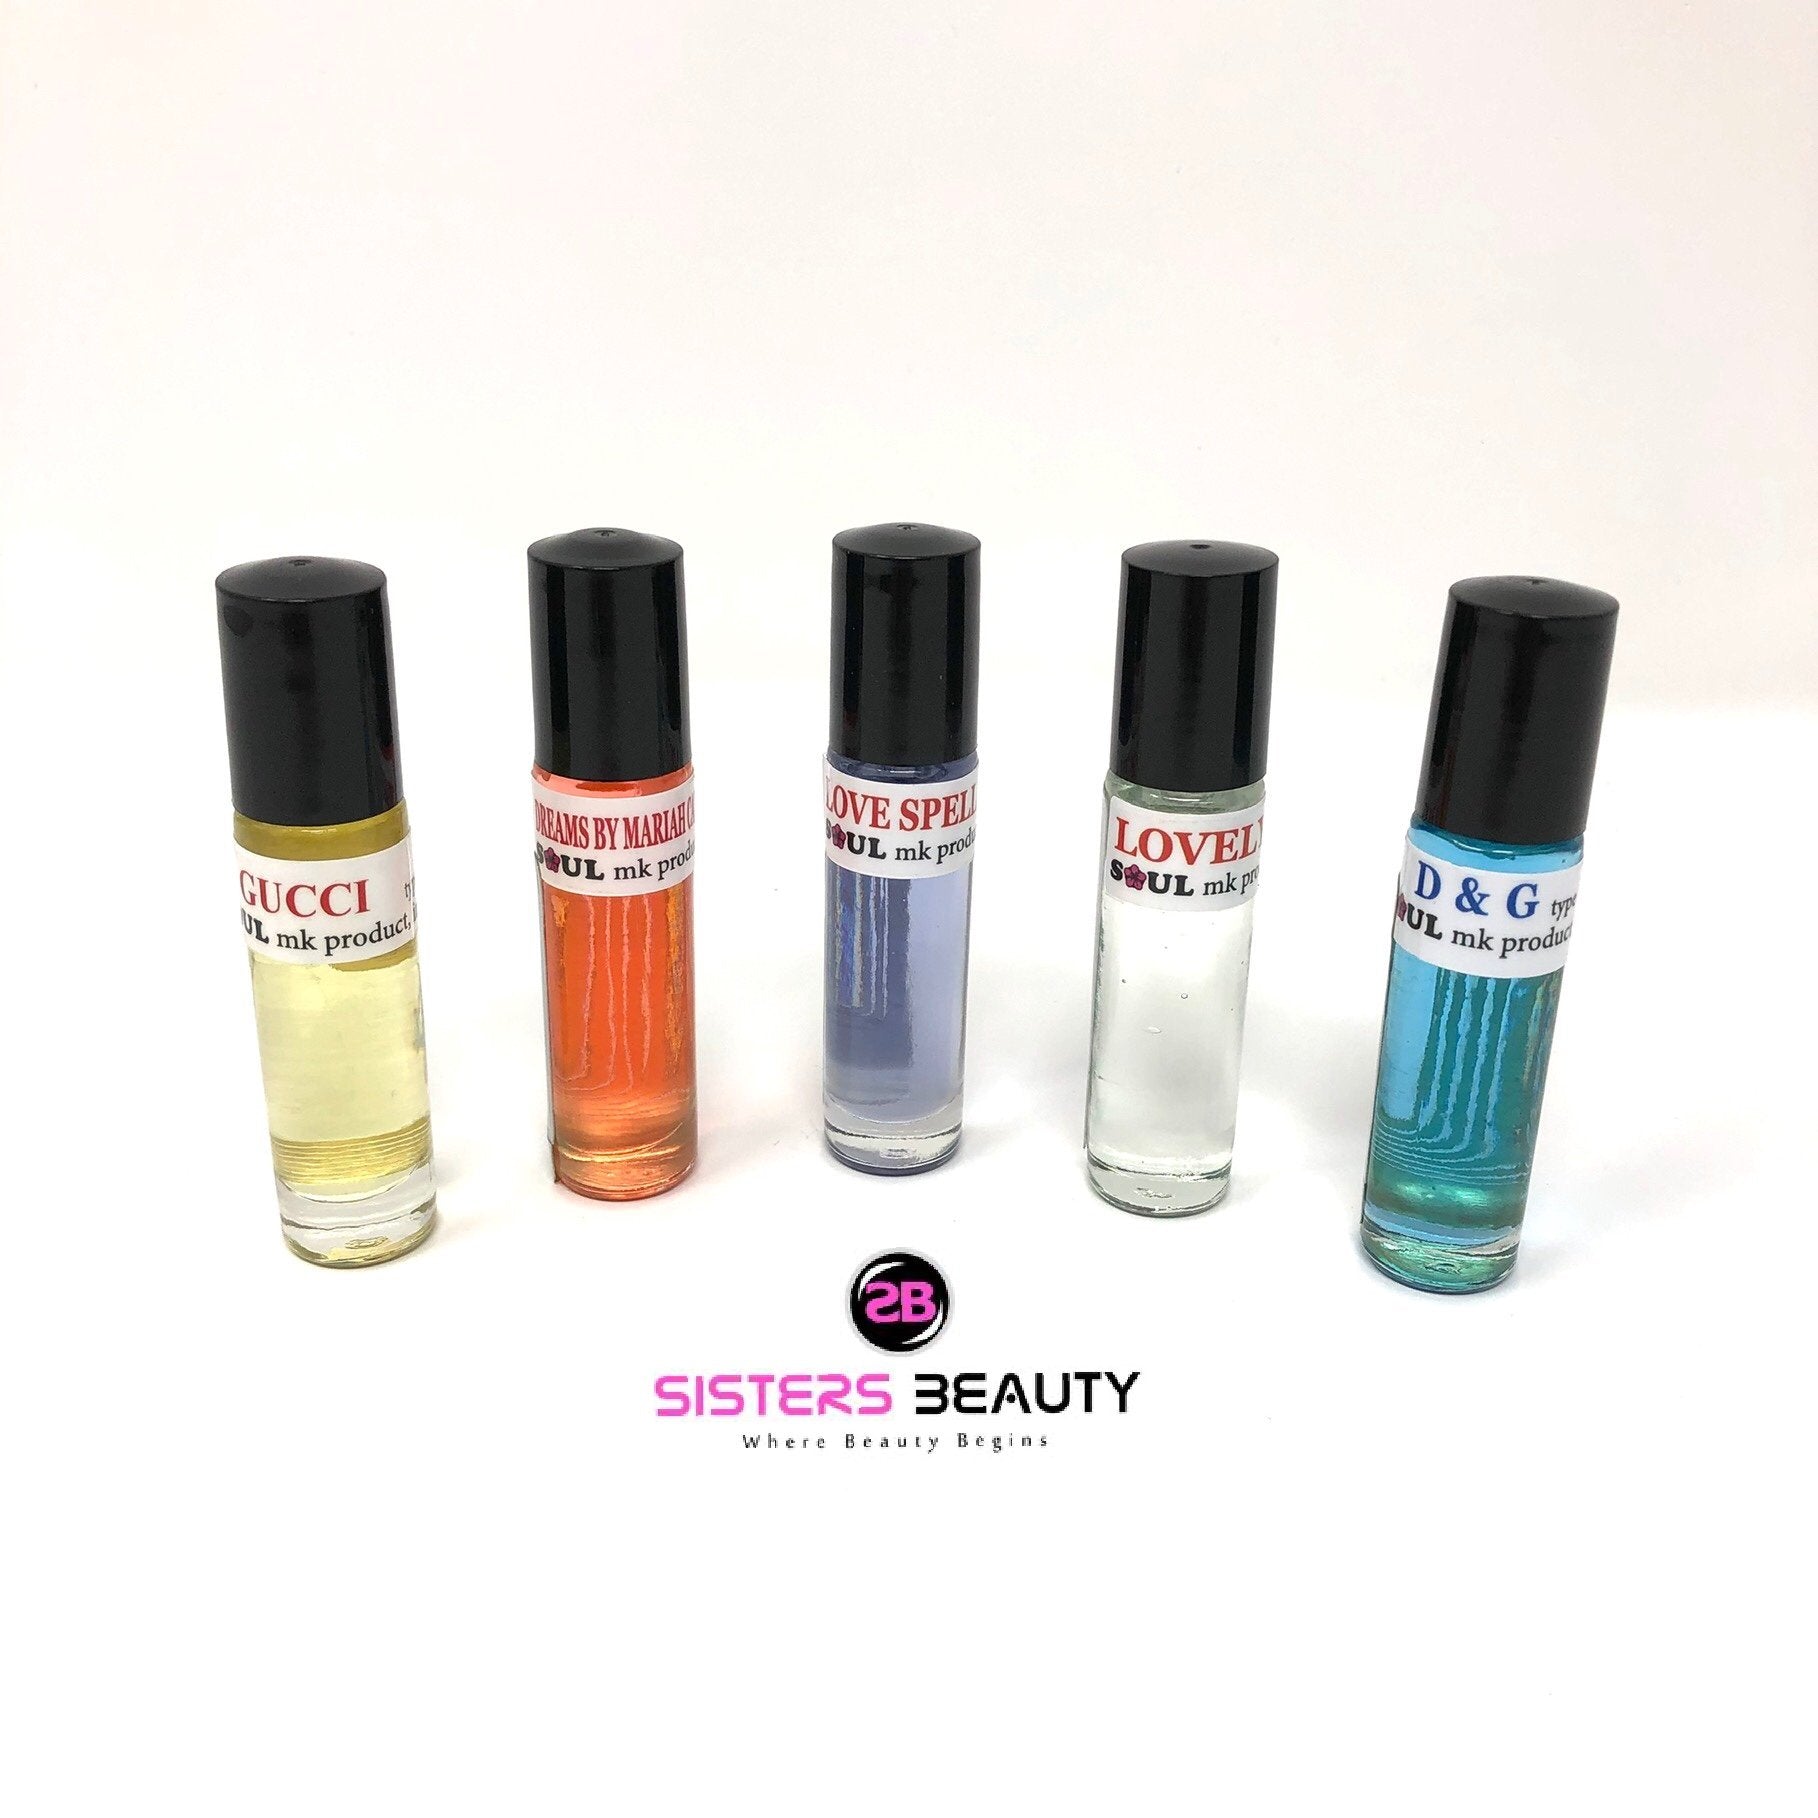 Pink P*ssy Perfume Oil Fragrance Roll On